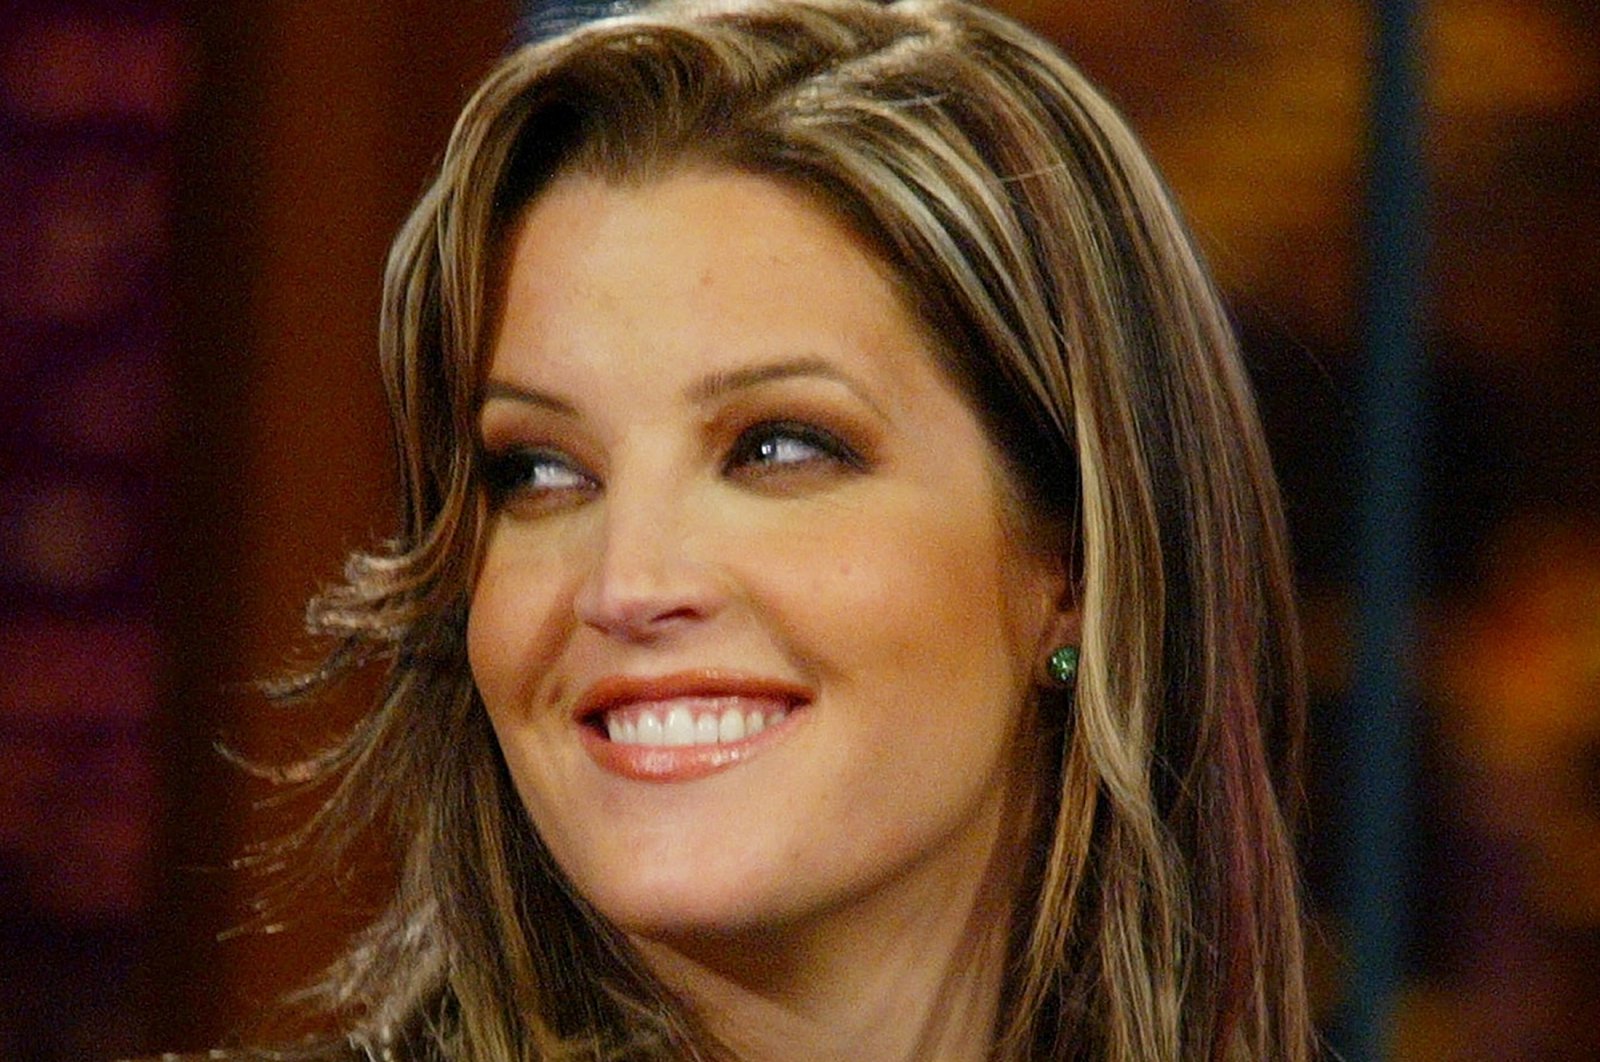 Singer Lisa Marie Presley appears as a guest on &quot;The Tonight Show with Jay Leno&quot; at the NBC studios in Burbank, California, U.S., May 1, 2003. (Reuters Photo)